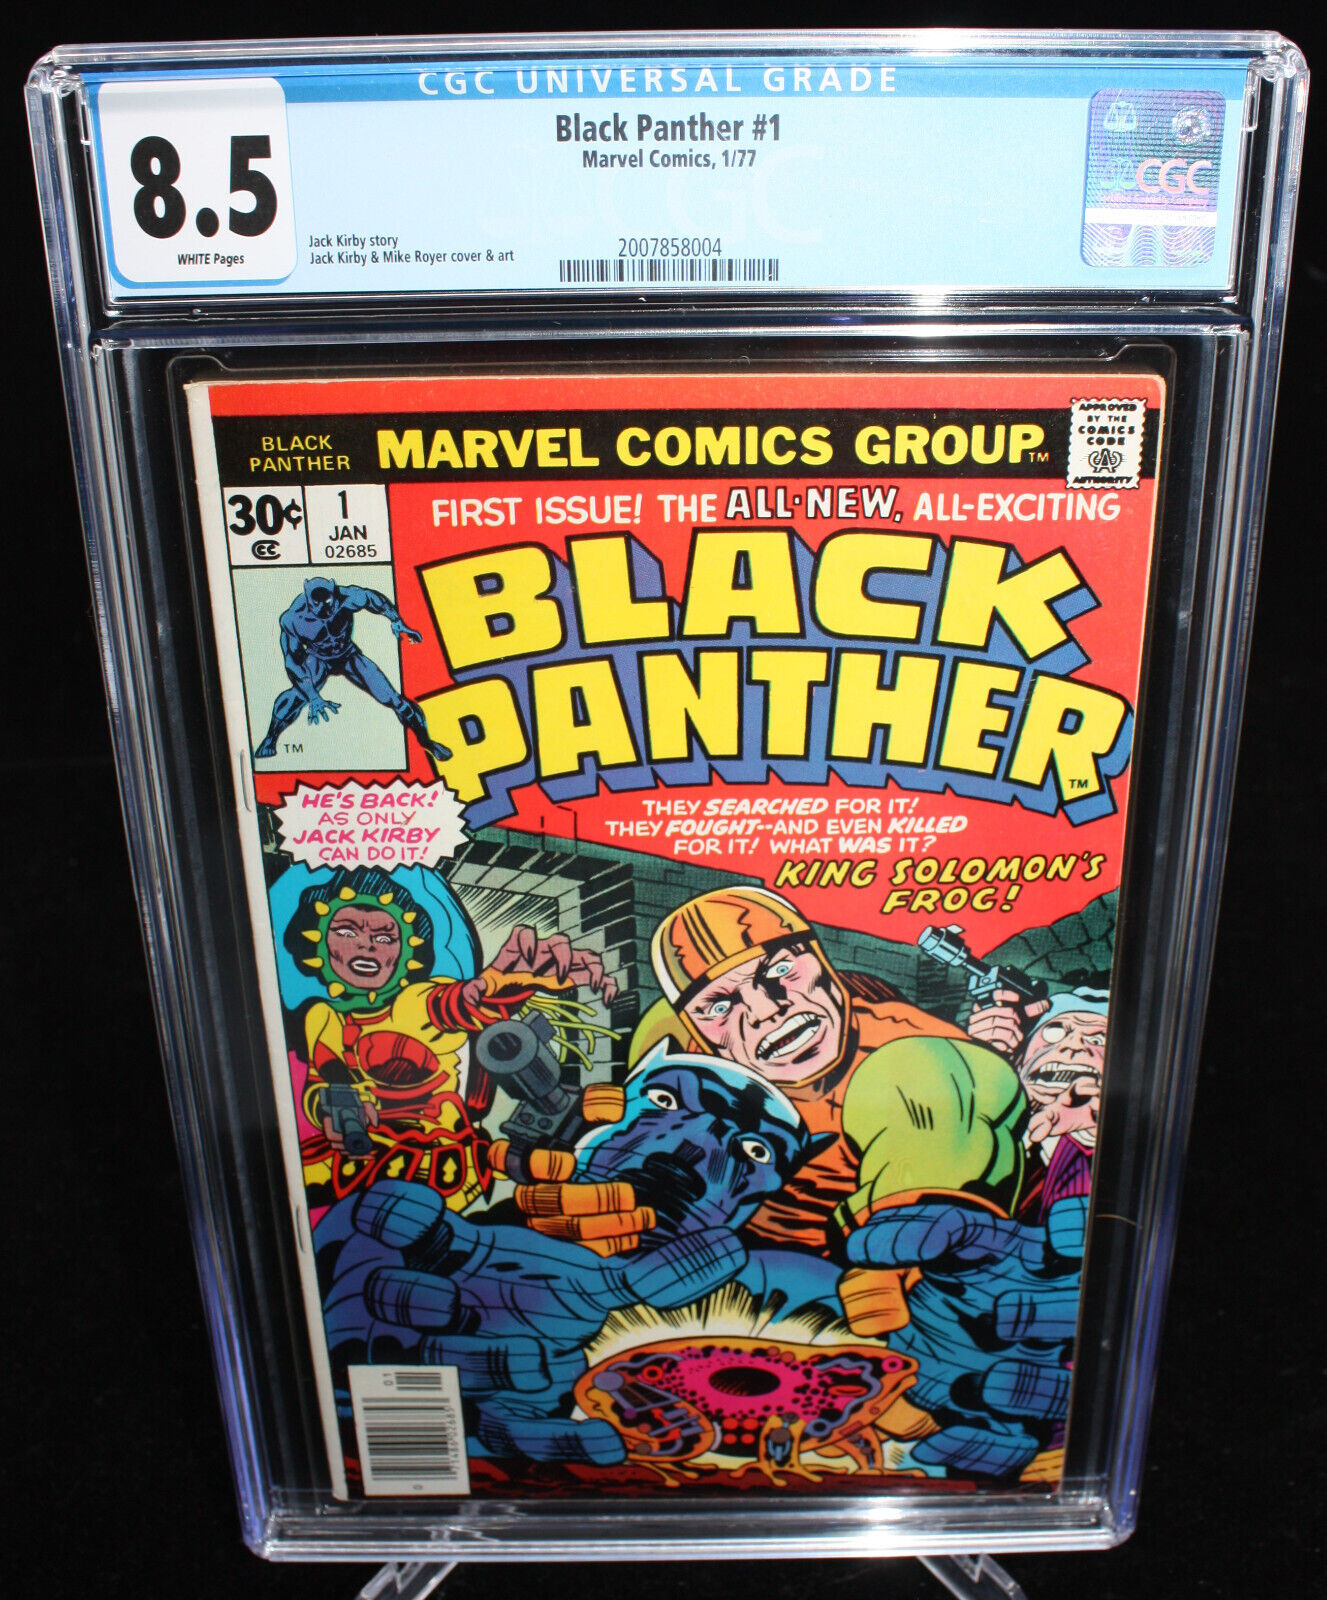 Black Panther #1 (CGC 8.5) White Pages - Jack Kirby & Mike Royer - 1977